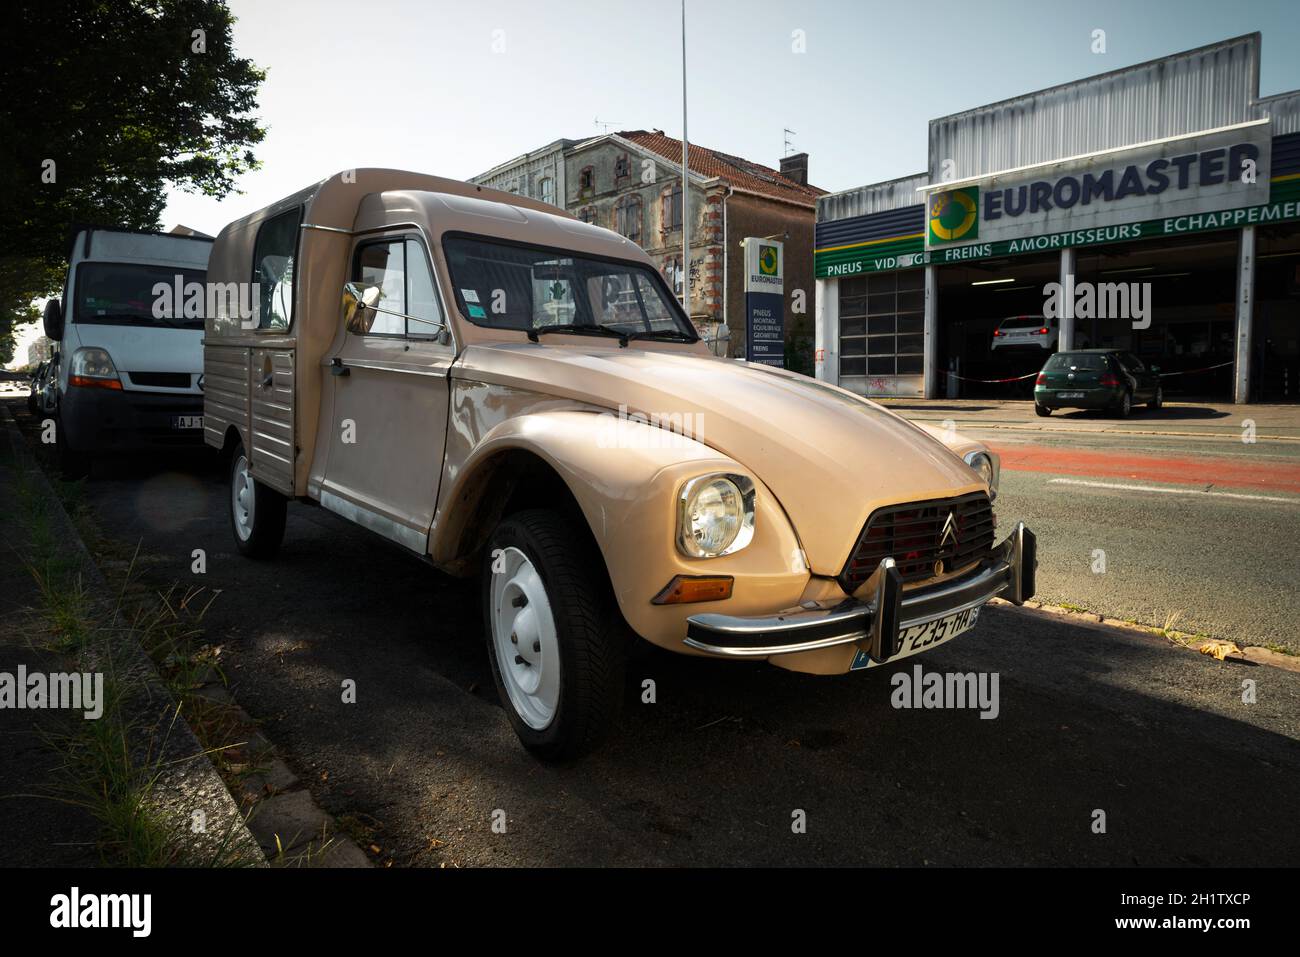 BAYONNE, FRANCE - CIRCA AUGUST 2020: A Citroen Acadiane parked in the street. It is a vintage small commercial vehicle. Stock Photo